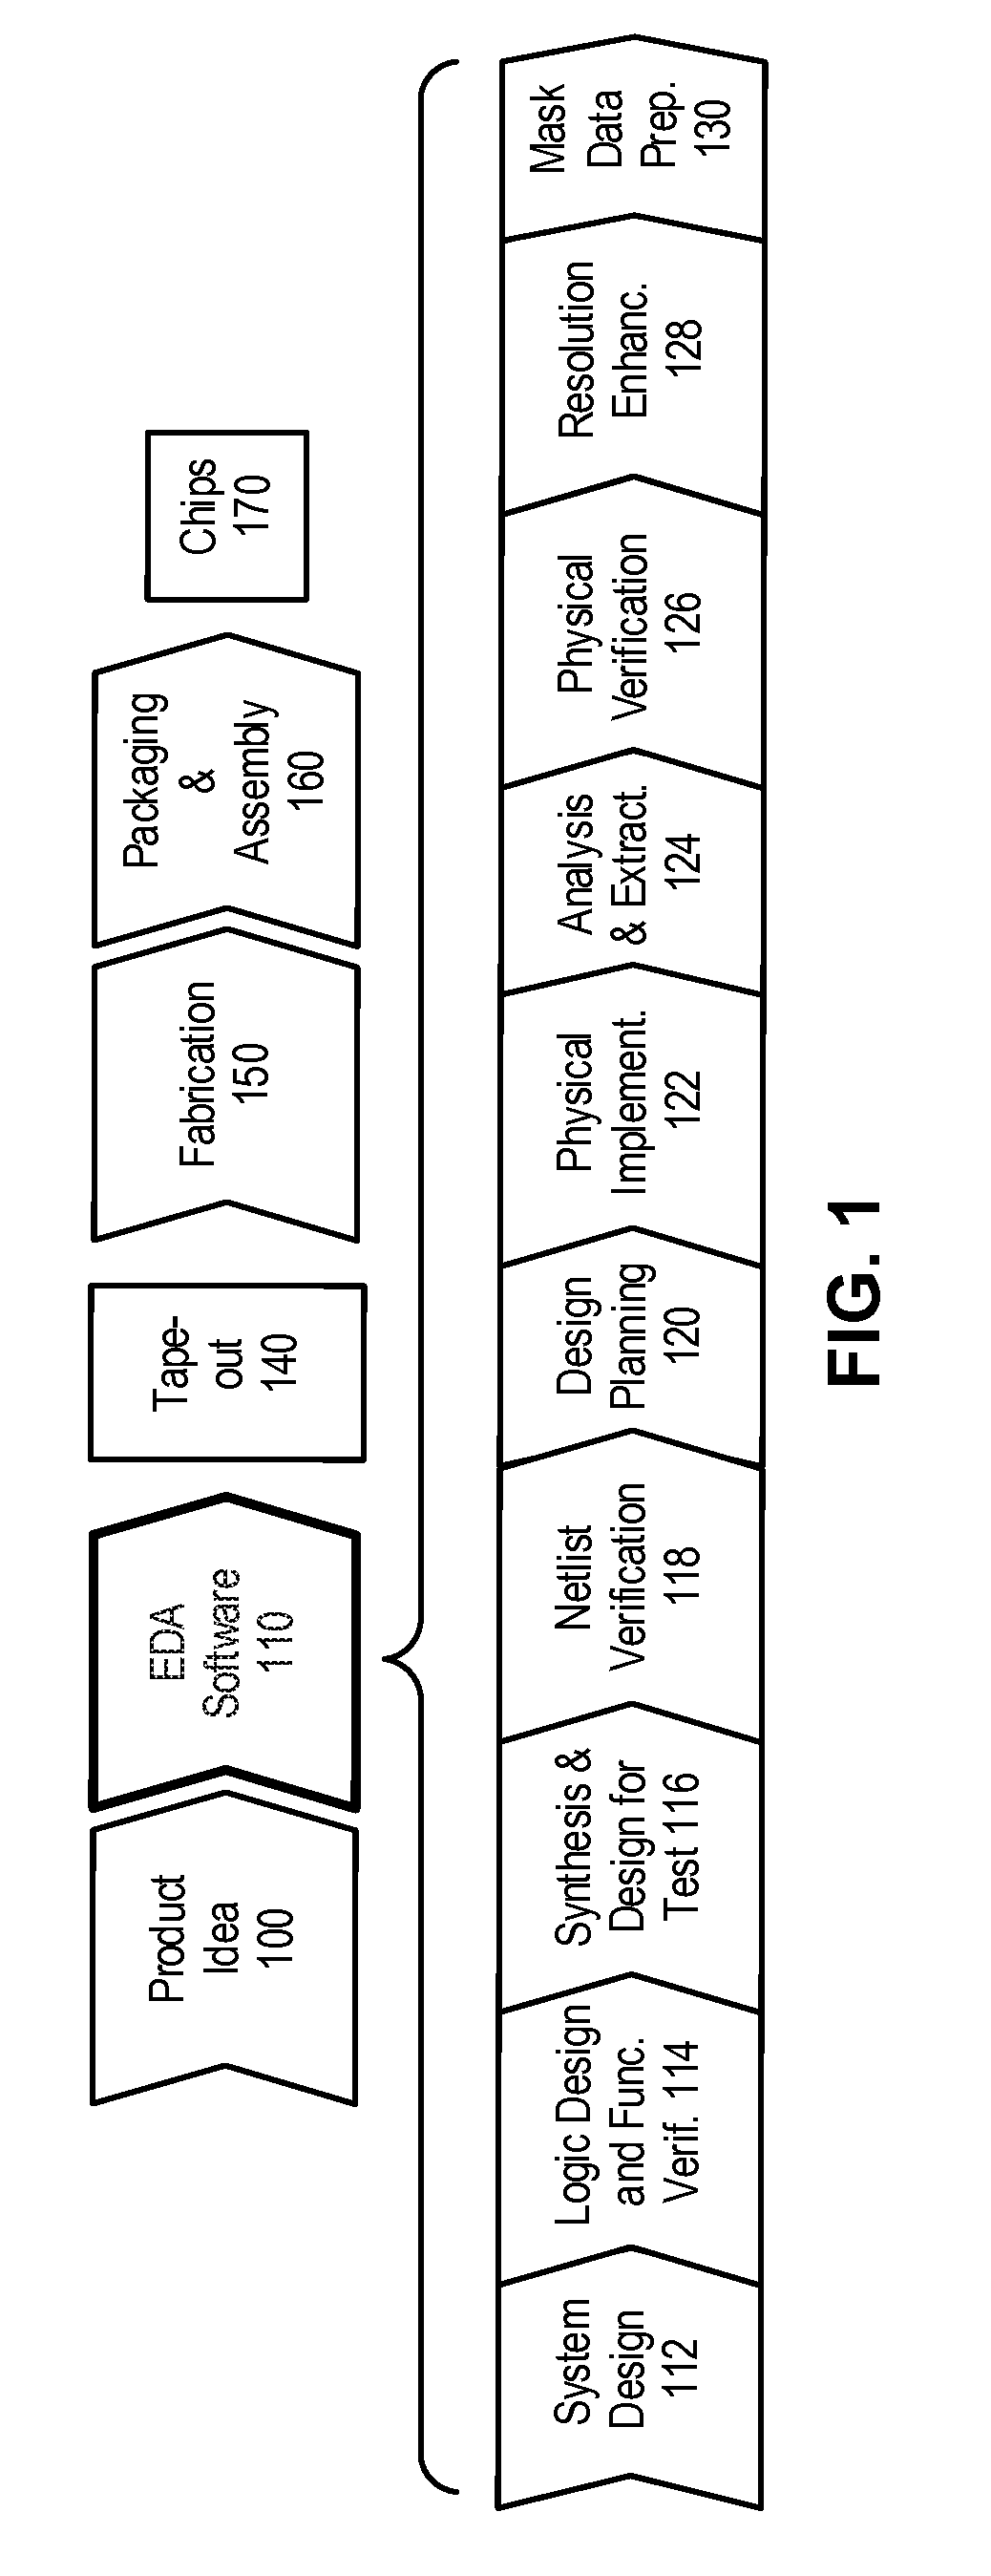 Runtime programmable BIST for testing a multi-port memory device